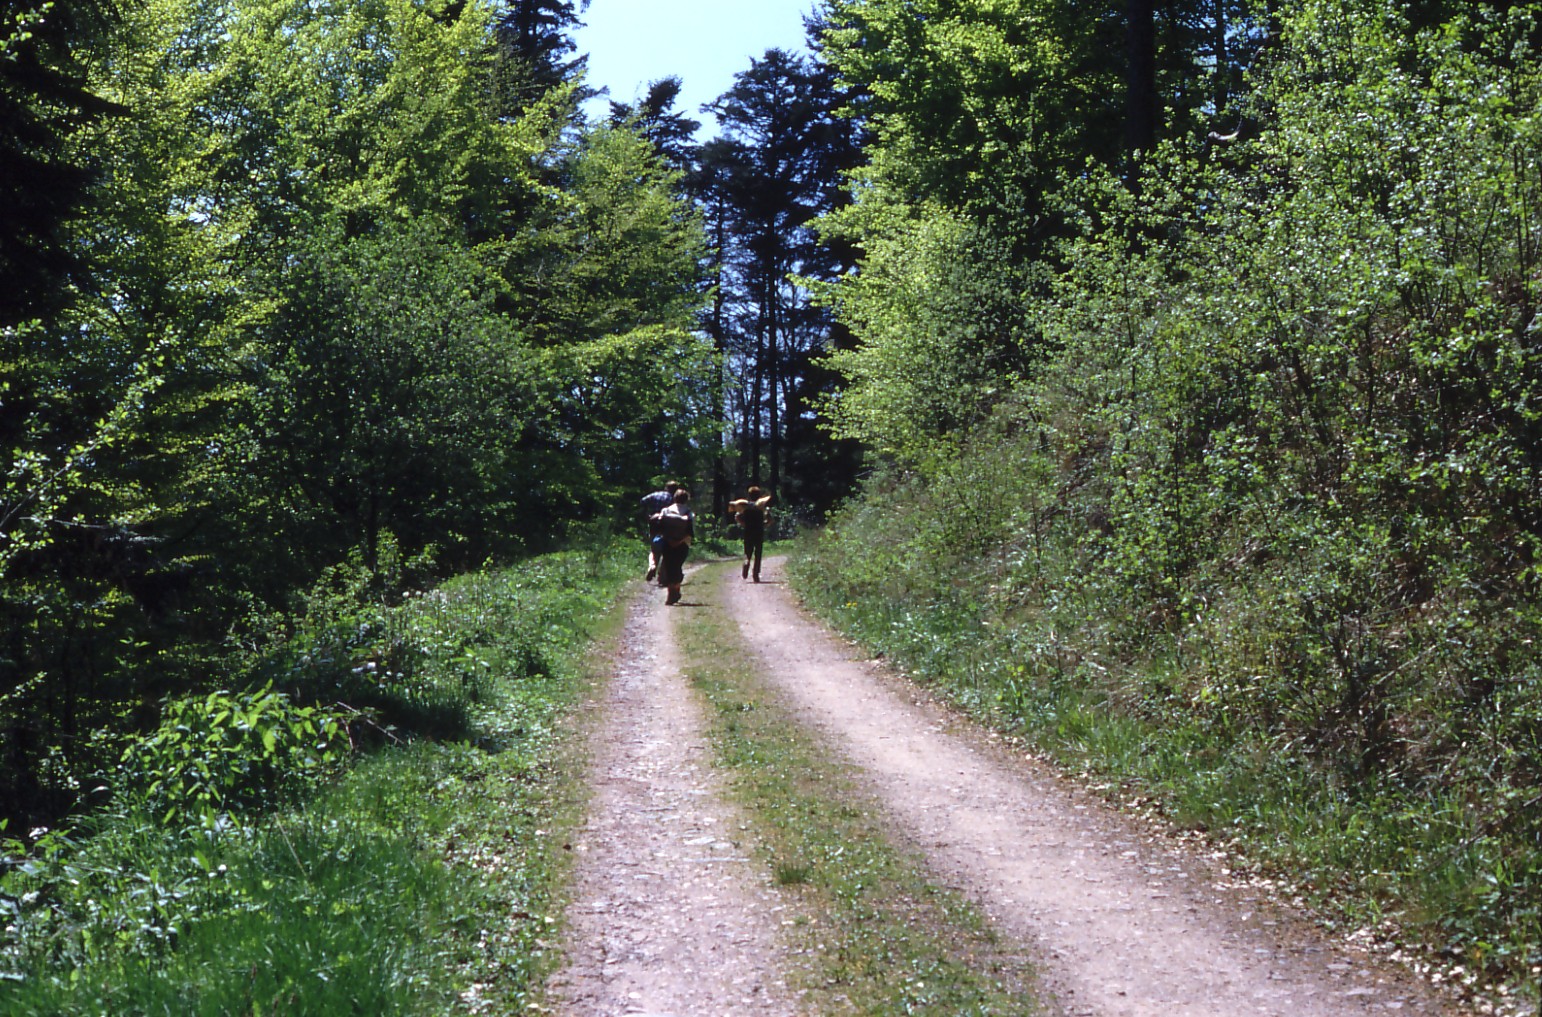 three people walk down a dirt road in the woods